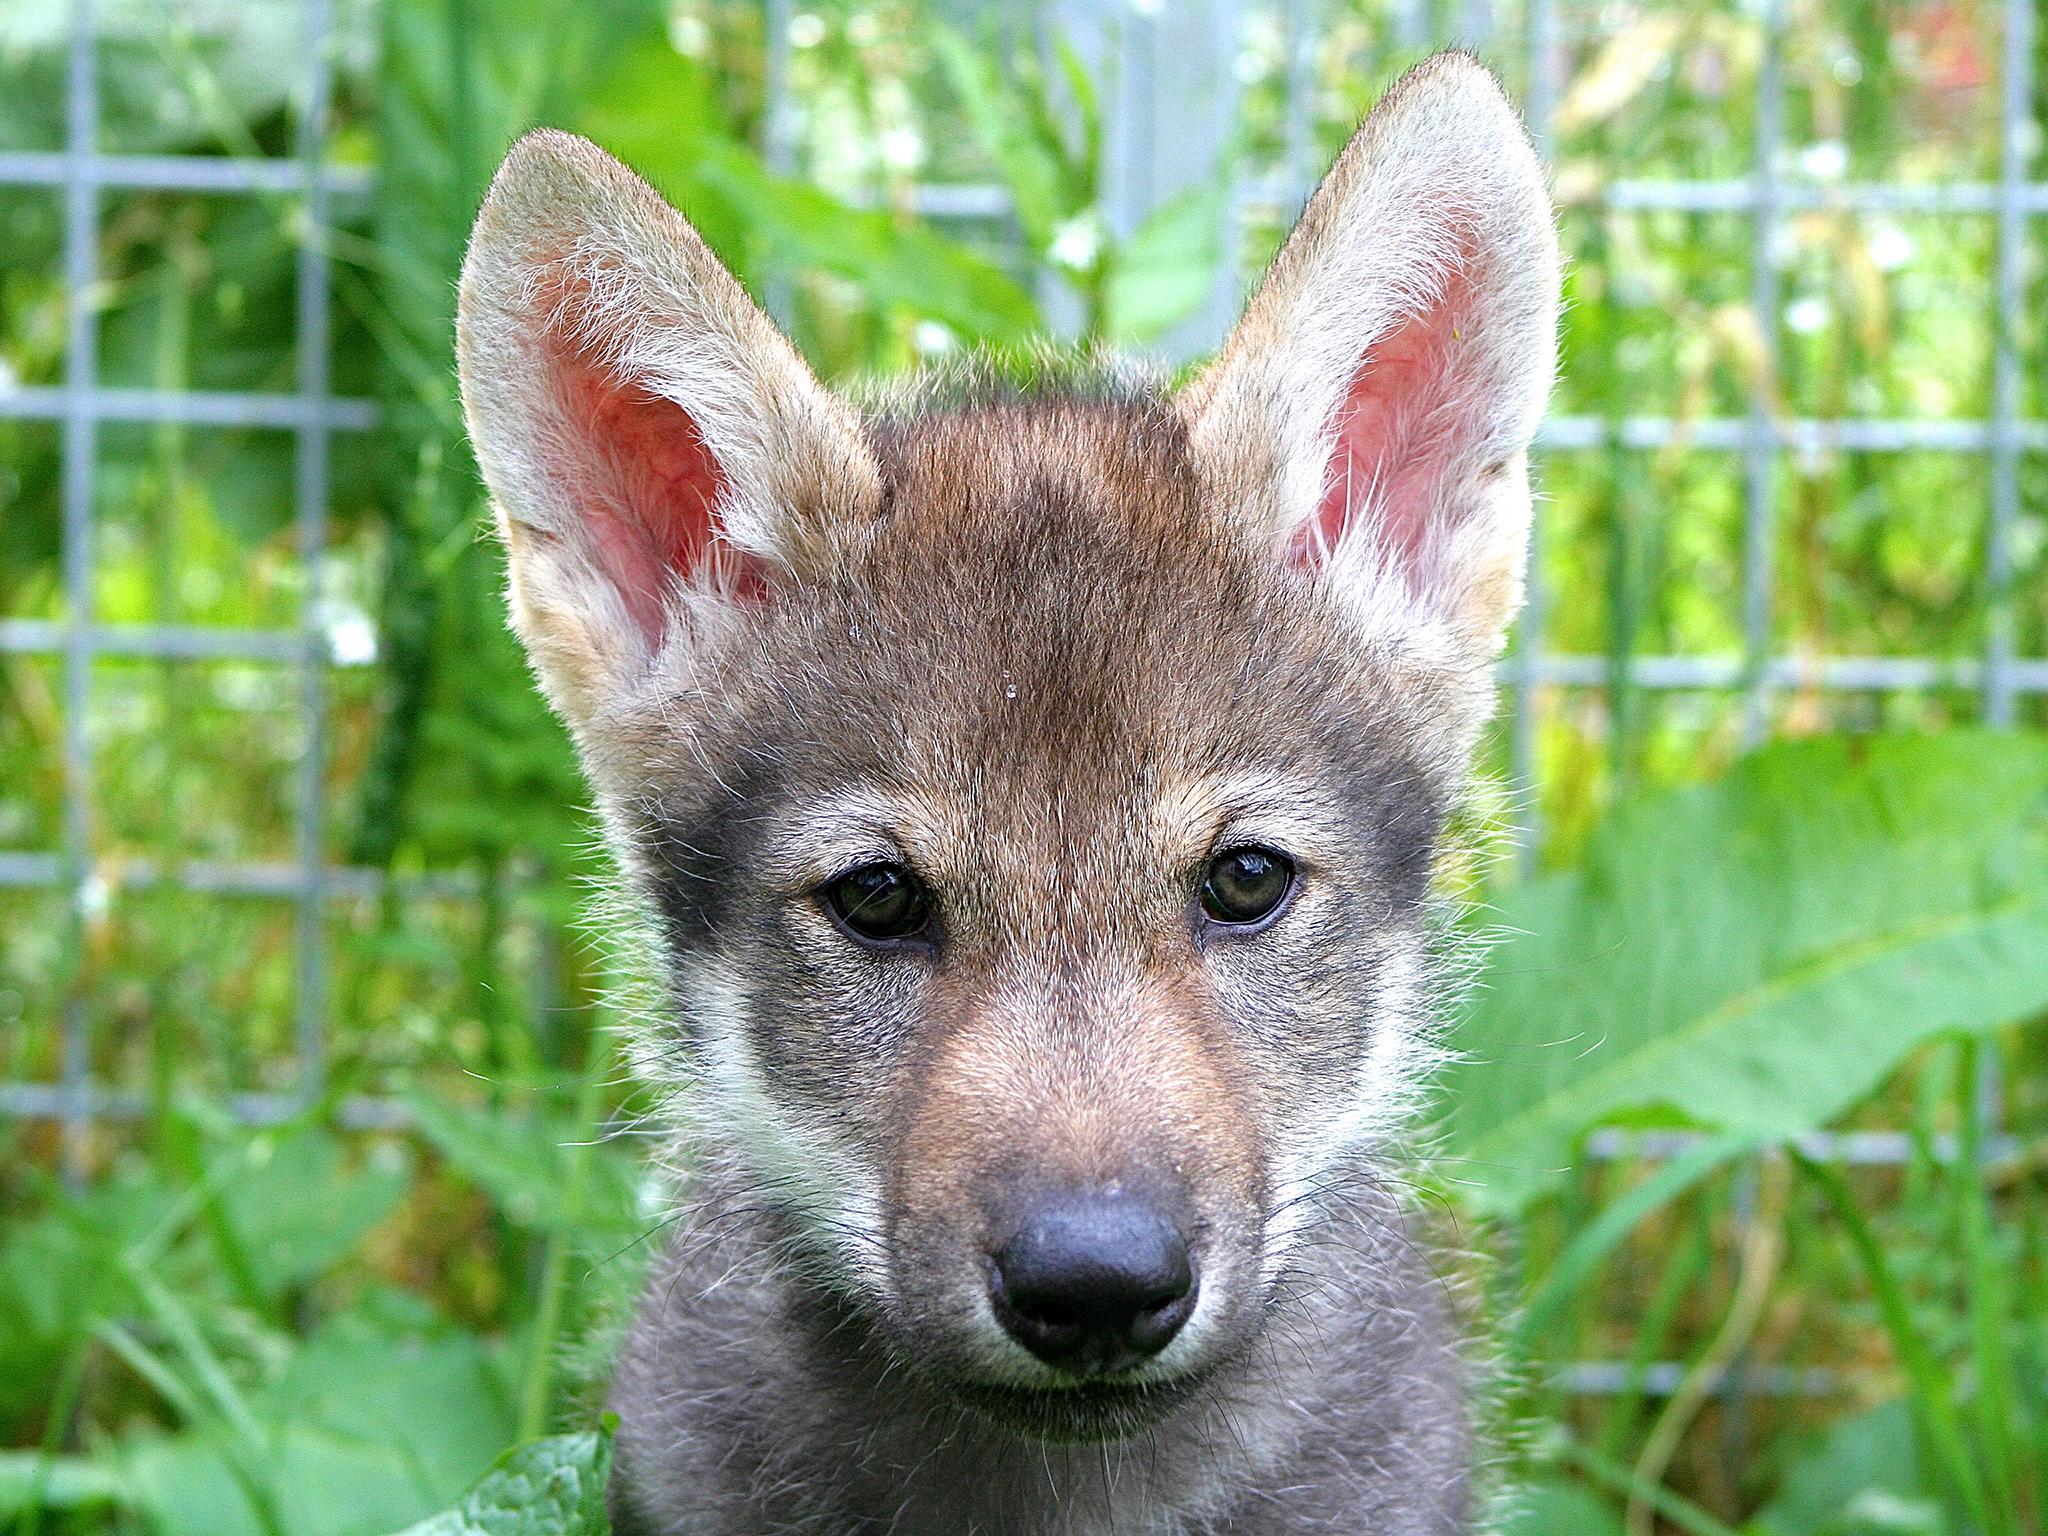 Scientists discover wolf cubs also play fetch, behaviour thought to belong to dogs alone